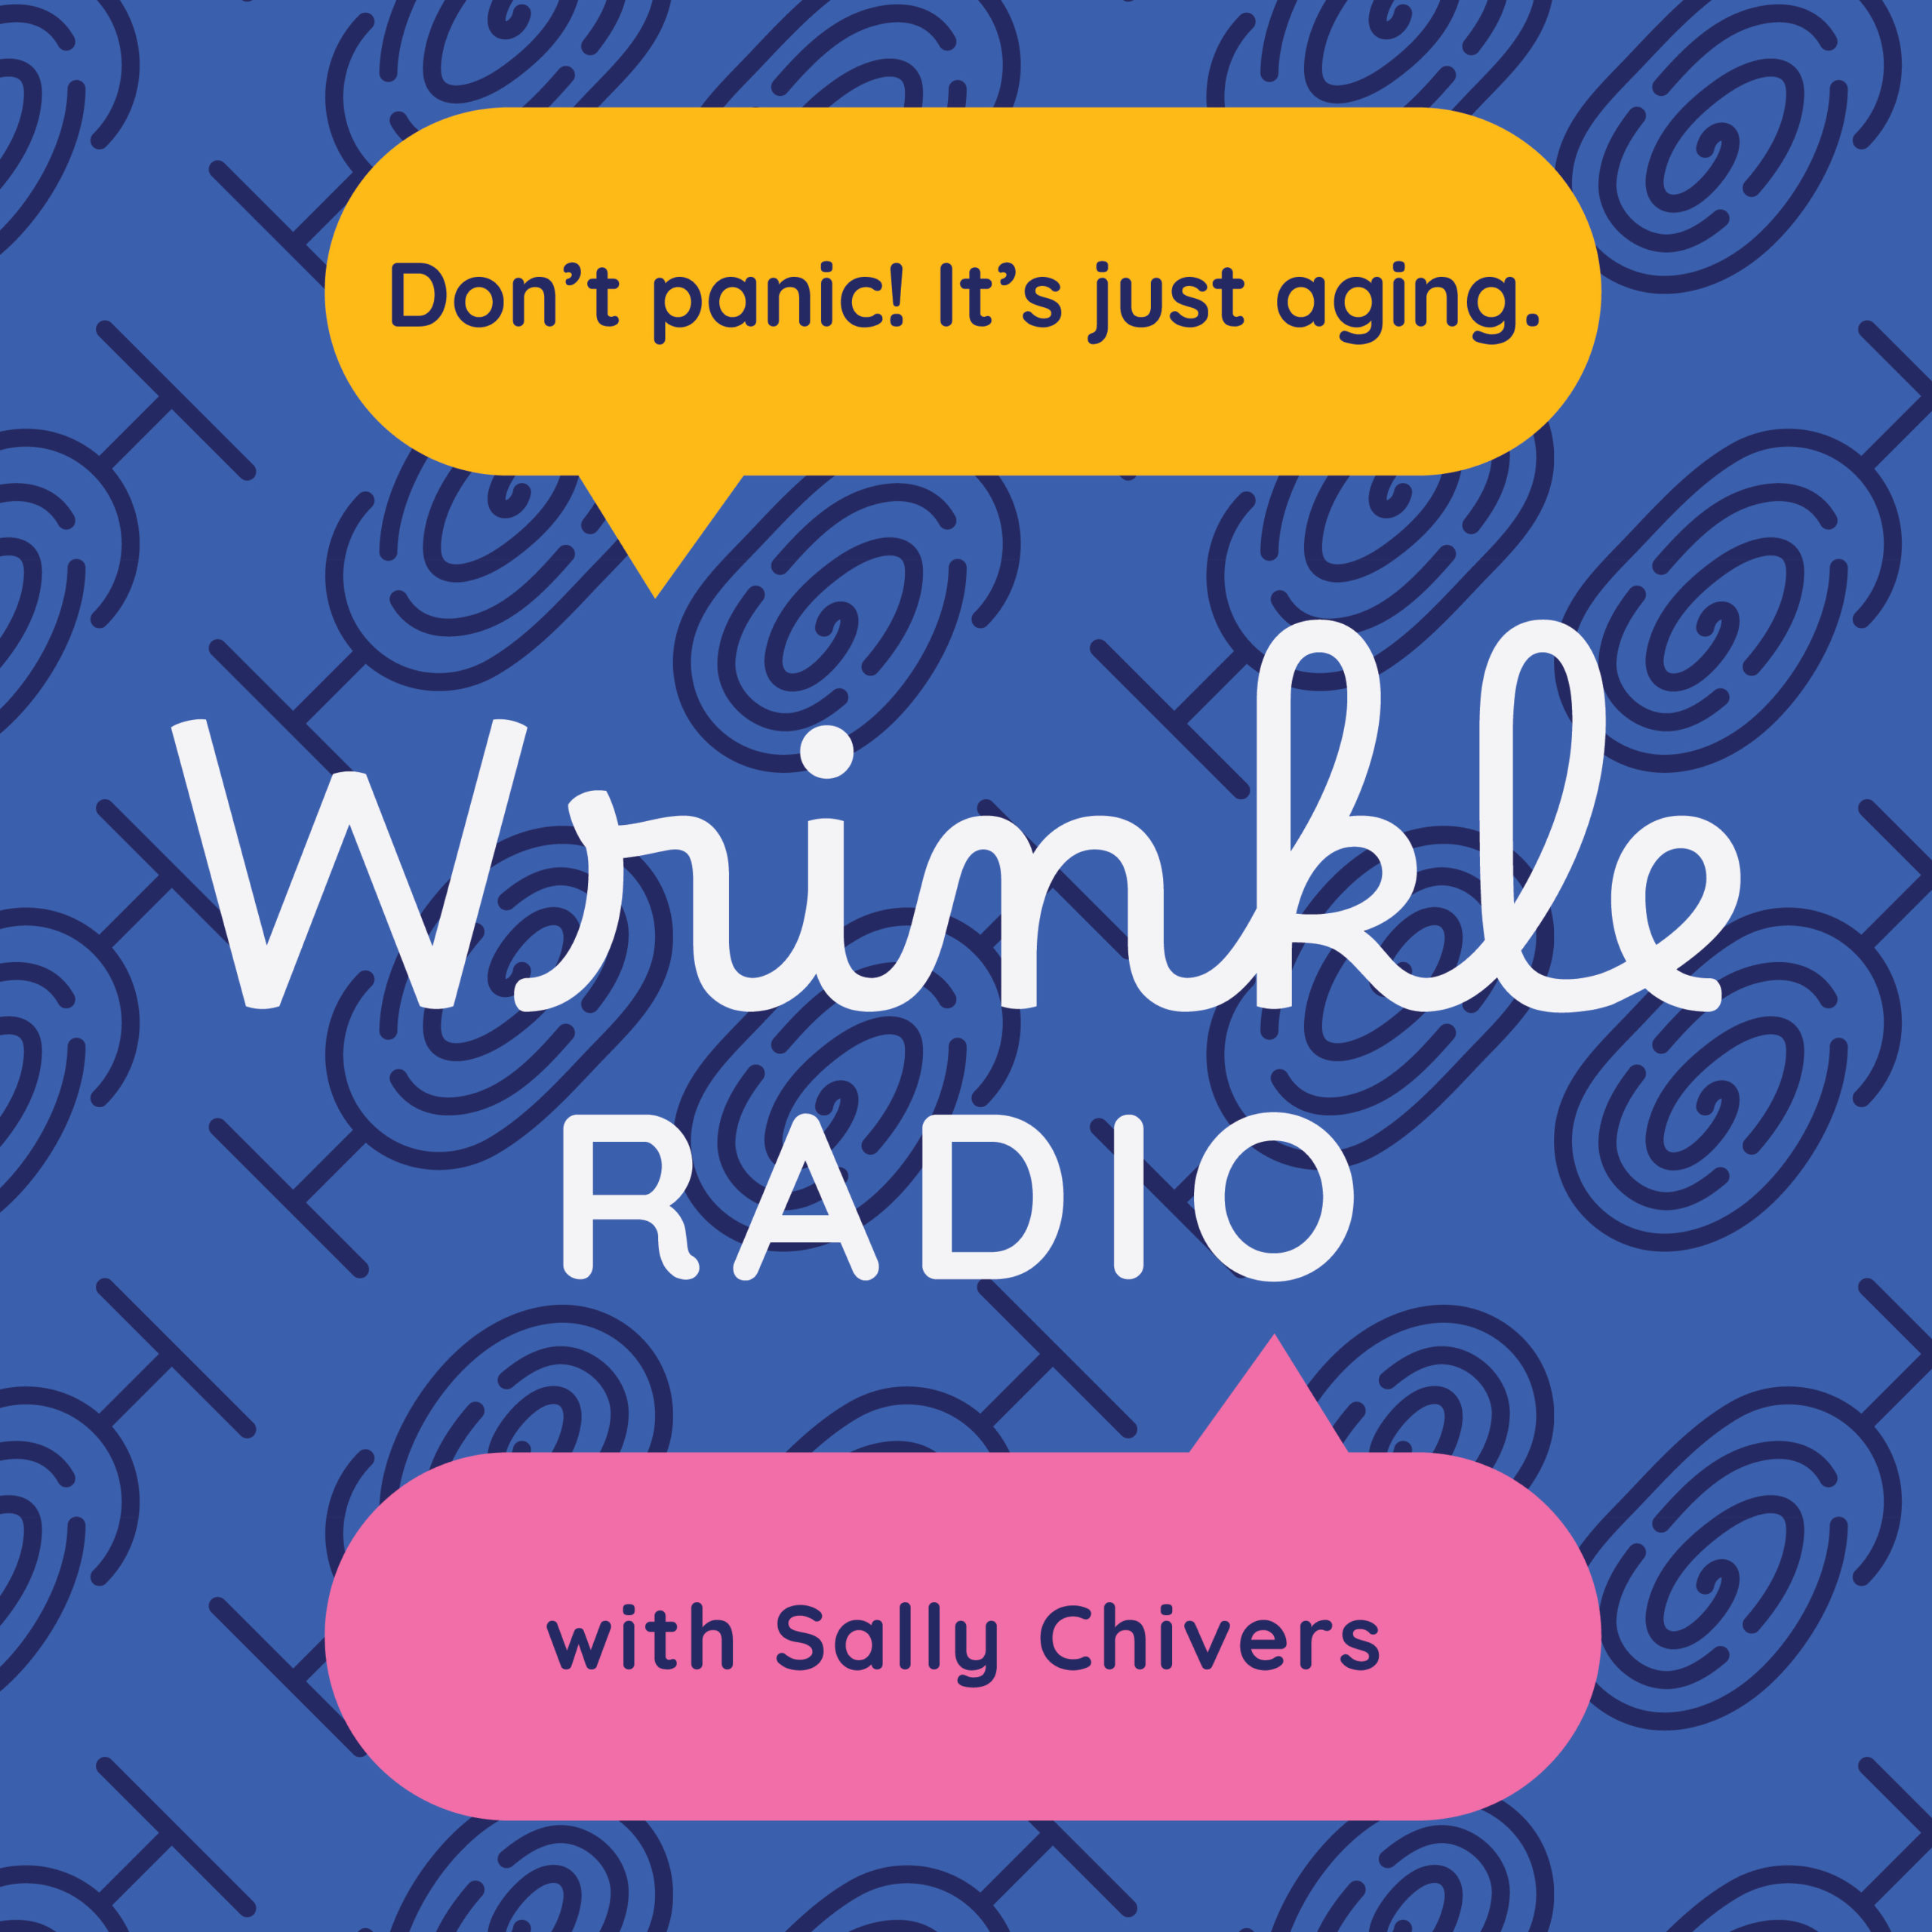 A colourful square that reads Don’t panic! It’s just aging. Wrinkle radio with Sally chivers. The background features wrinkled microphones as wallpaper.